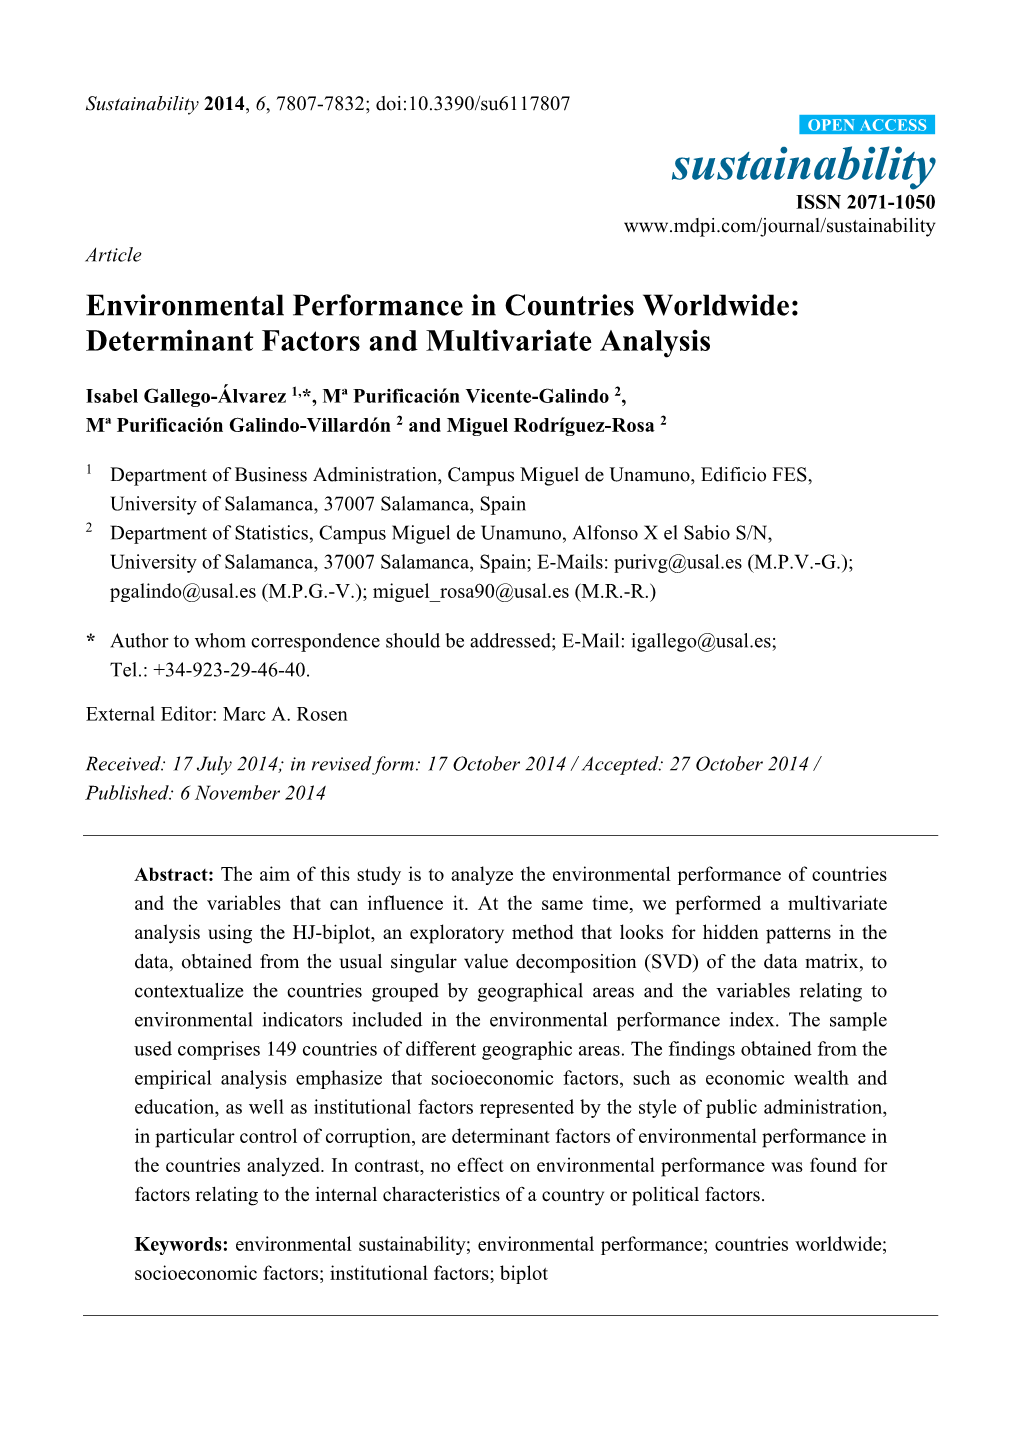 Environmental Performance in Countries Worldwide: Determinant Factors and Multivariate Analysis